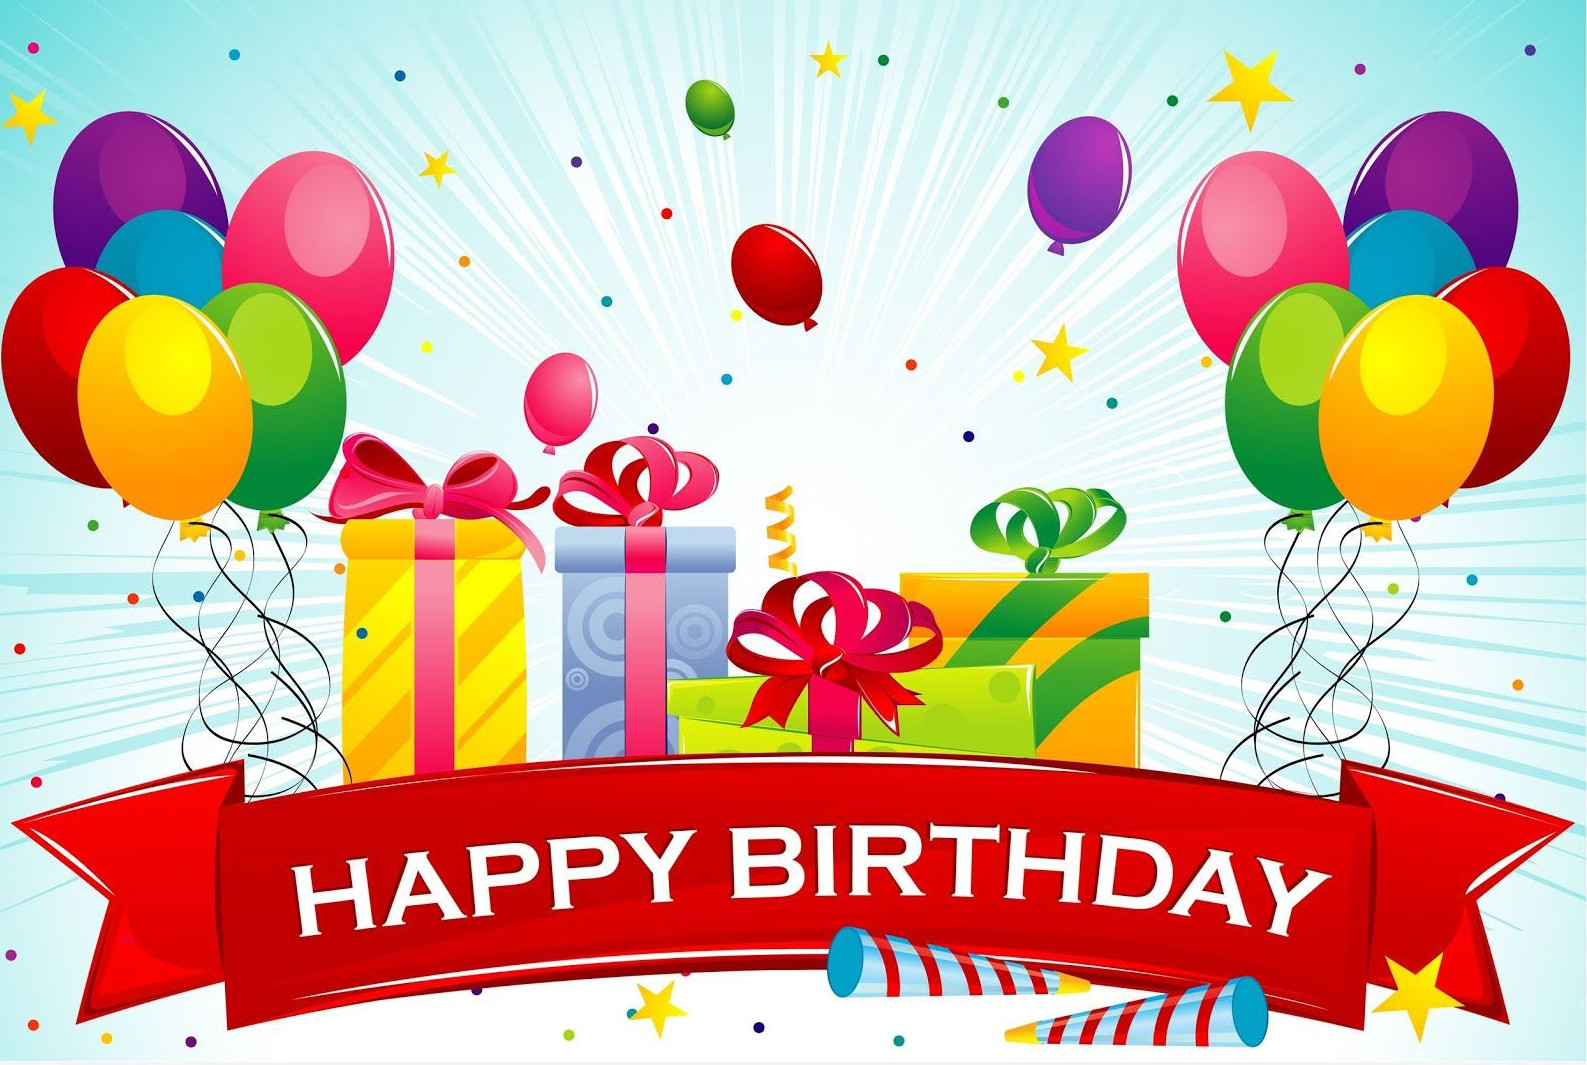 Birthday Greetings Cards
 35 Happy Birthday Cards Free To Download – The WoW Style